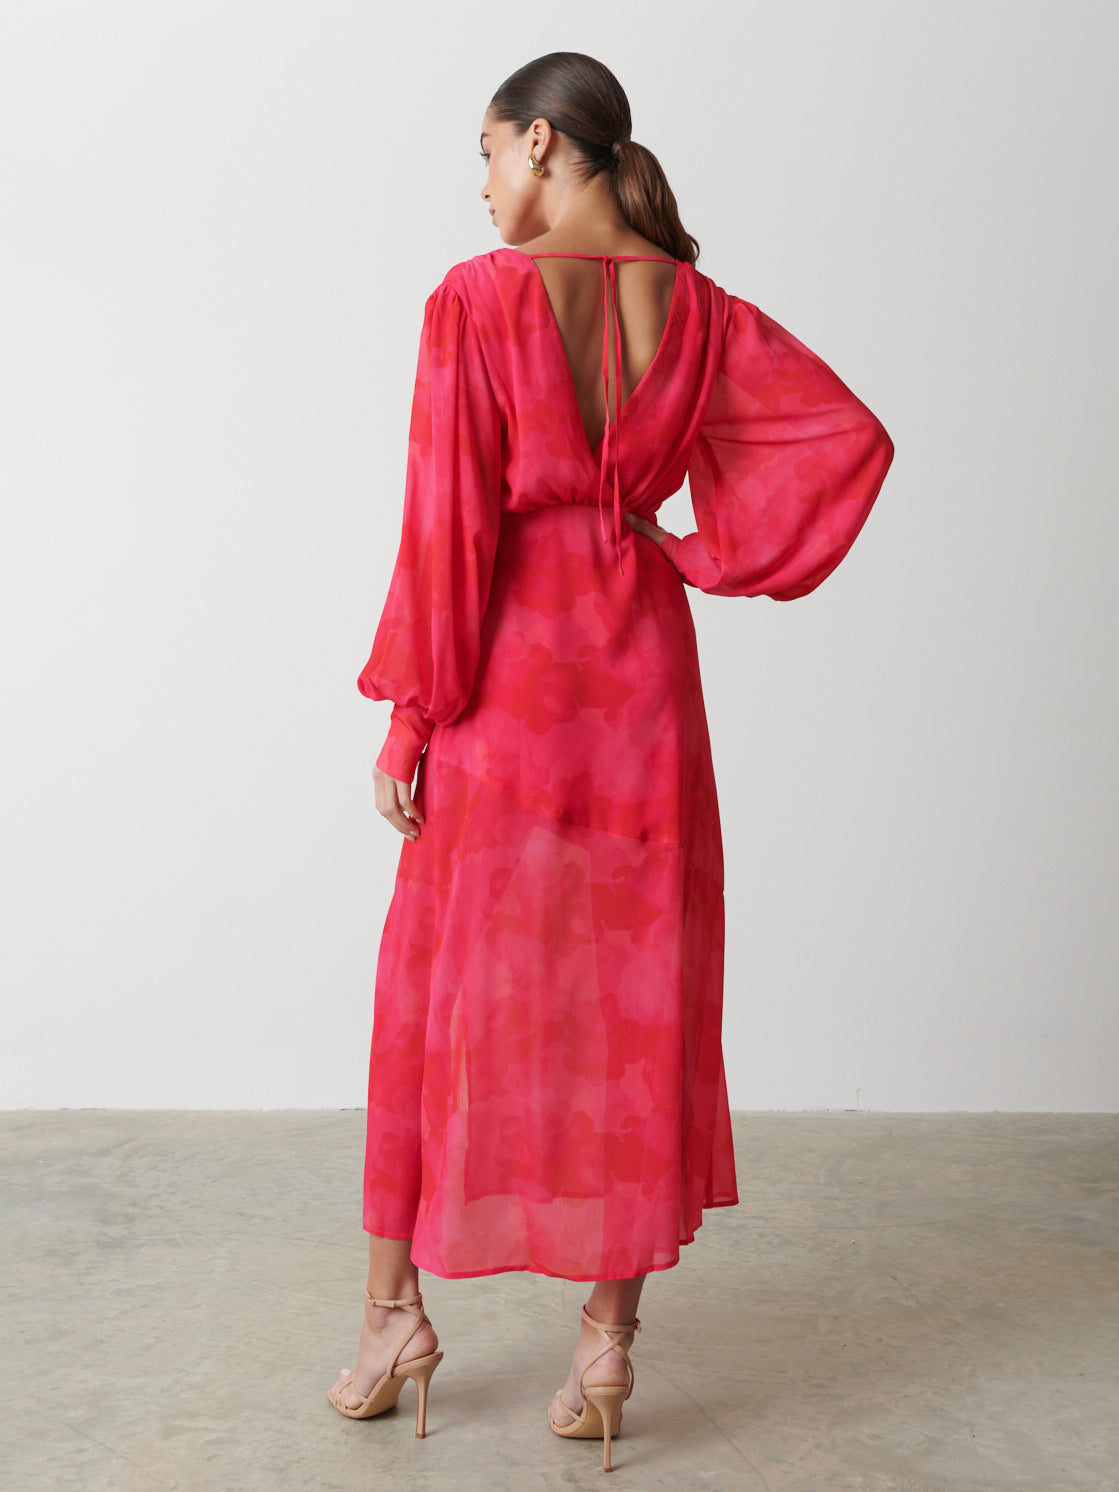 Lilianna Backless Balloon Sleeve Printed Dress - Pink and Red Watercolour